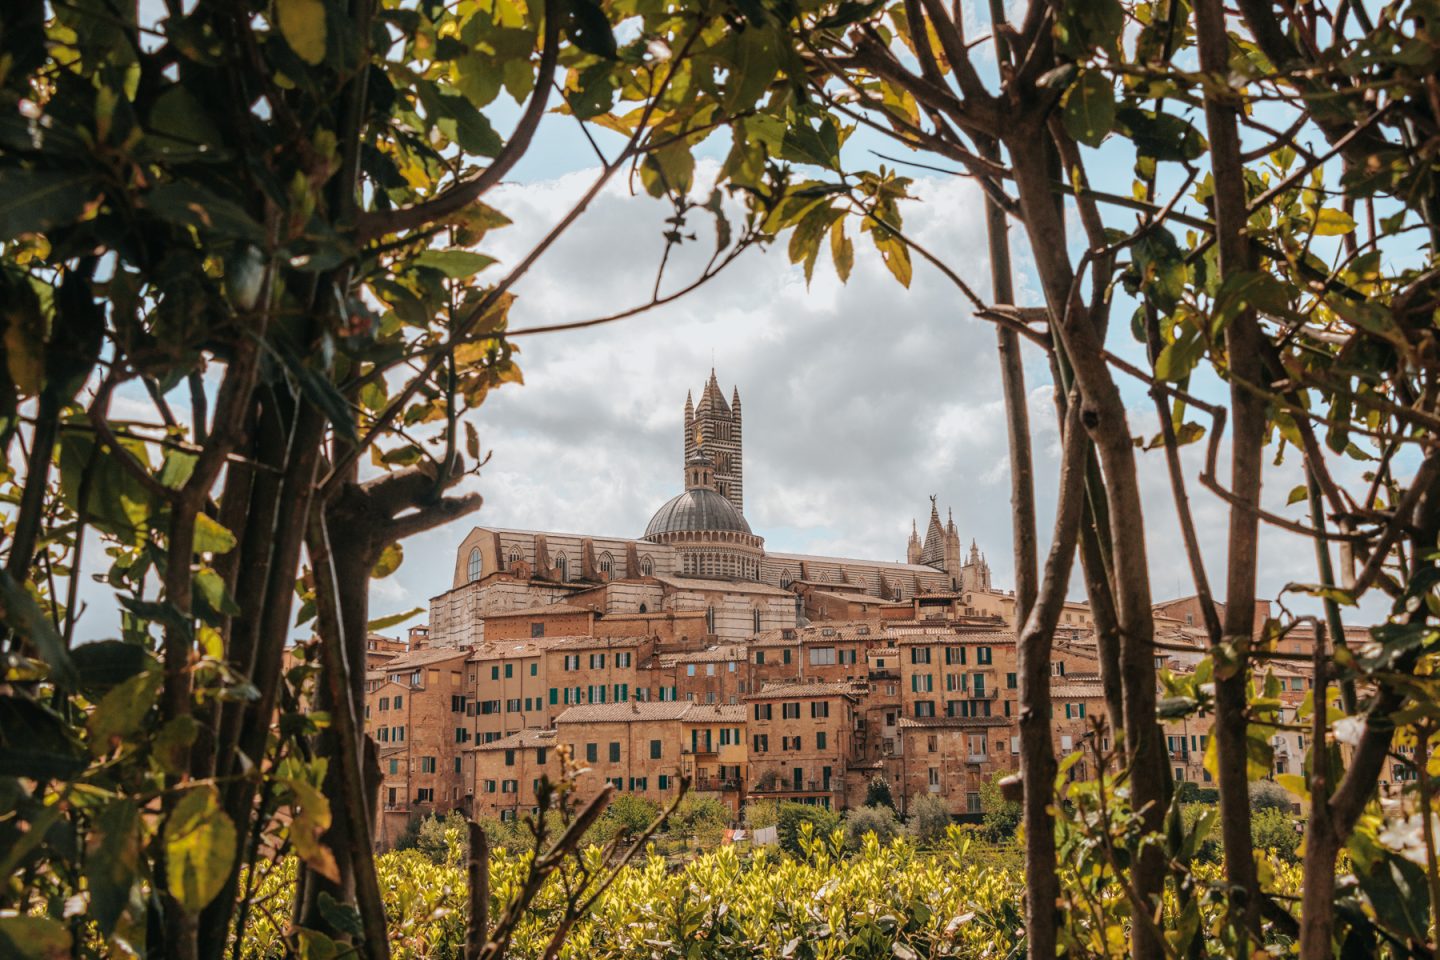 Siena cathedral among medieval houses framed by green vines